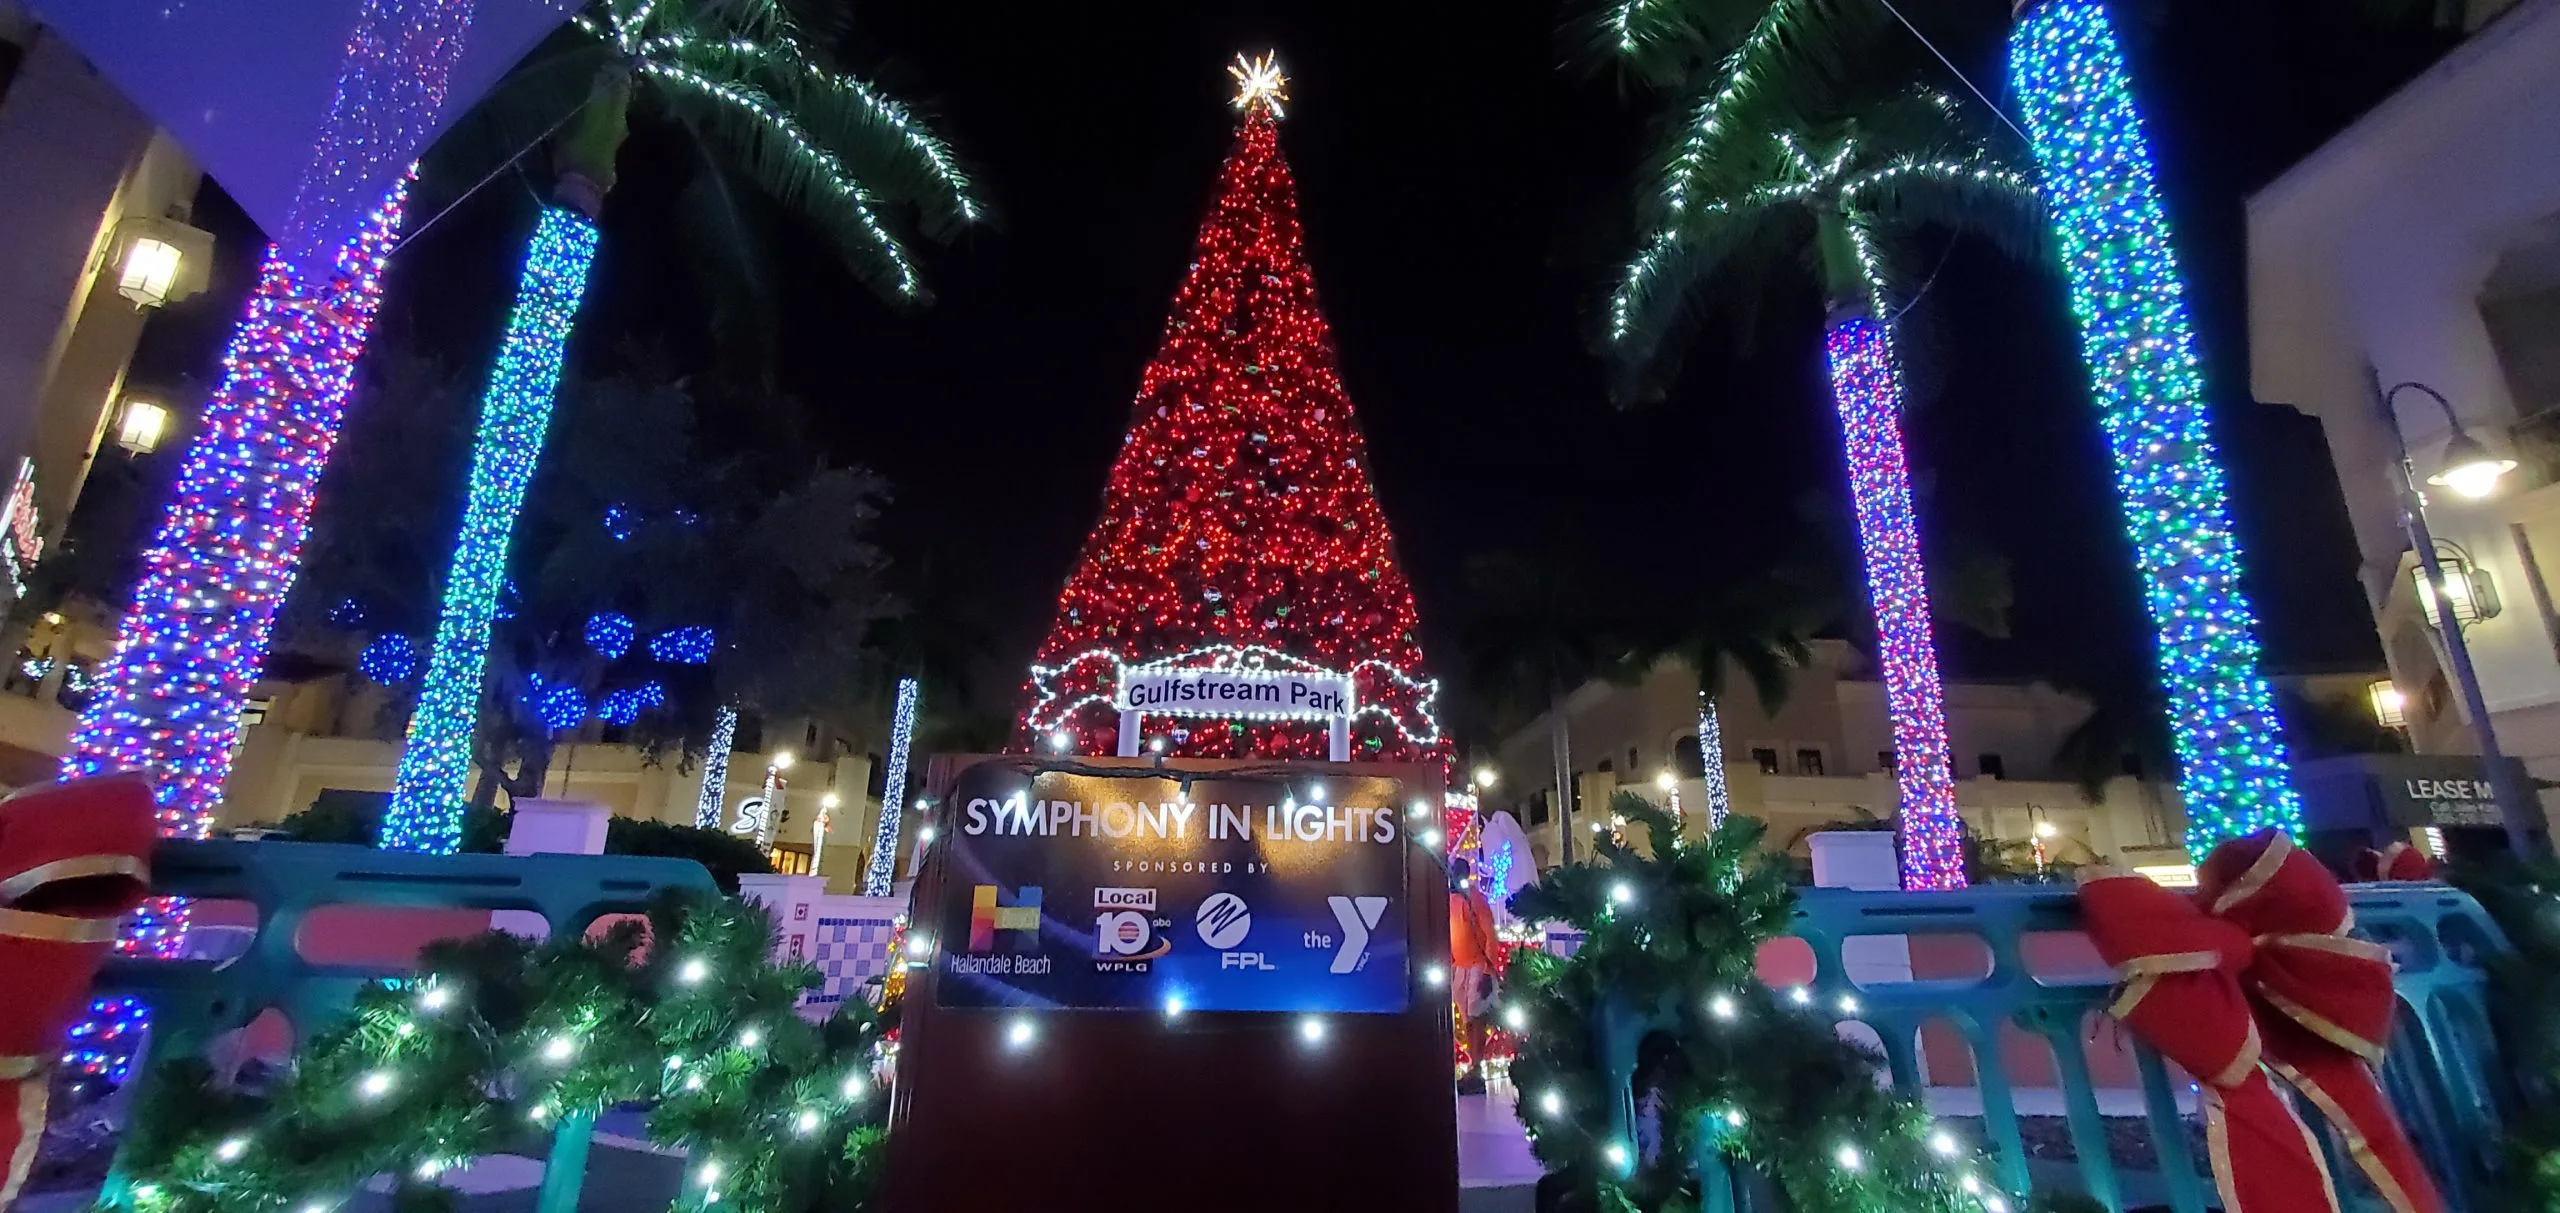 Sawgrass Mills Mall - Holiday Expo Tickets, Sat, Dec 16, 2023 at 10:00 AM